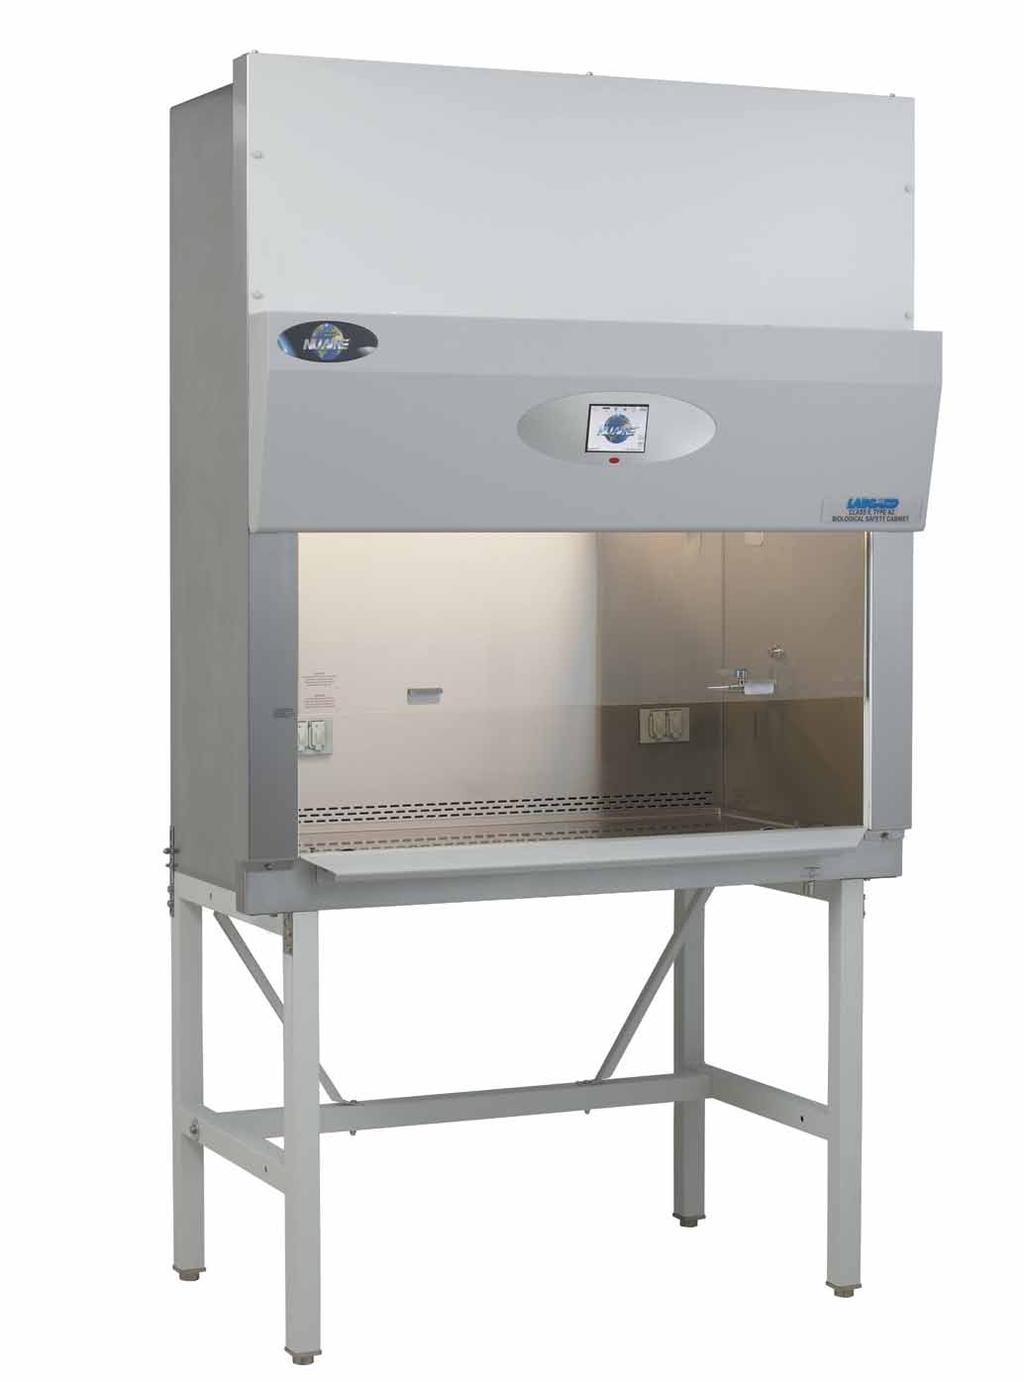 The cabinet s airflow is 30% exhausted / 70% recirculated to minimize cross-contamination of low to moderate risk biologicals in the absence of volatile toxic